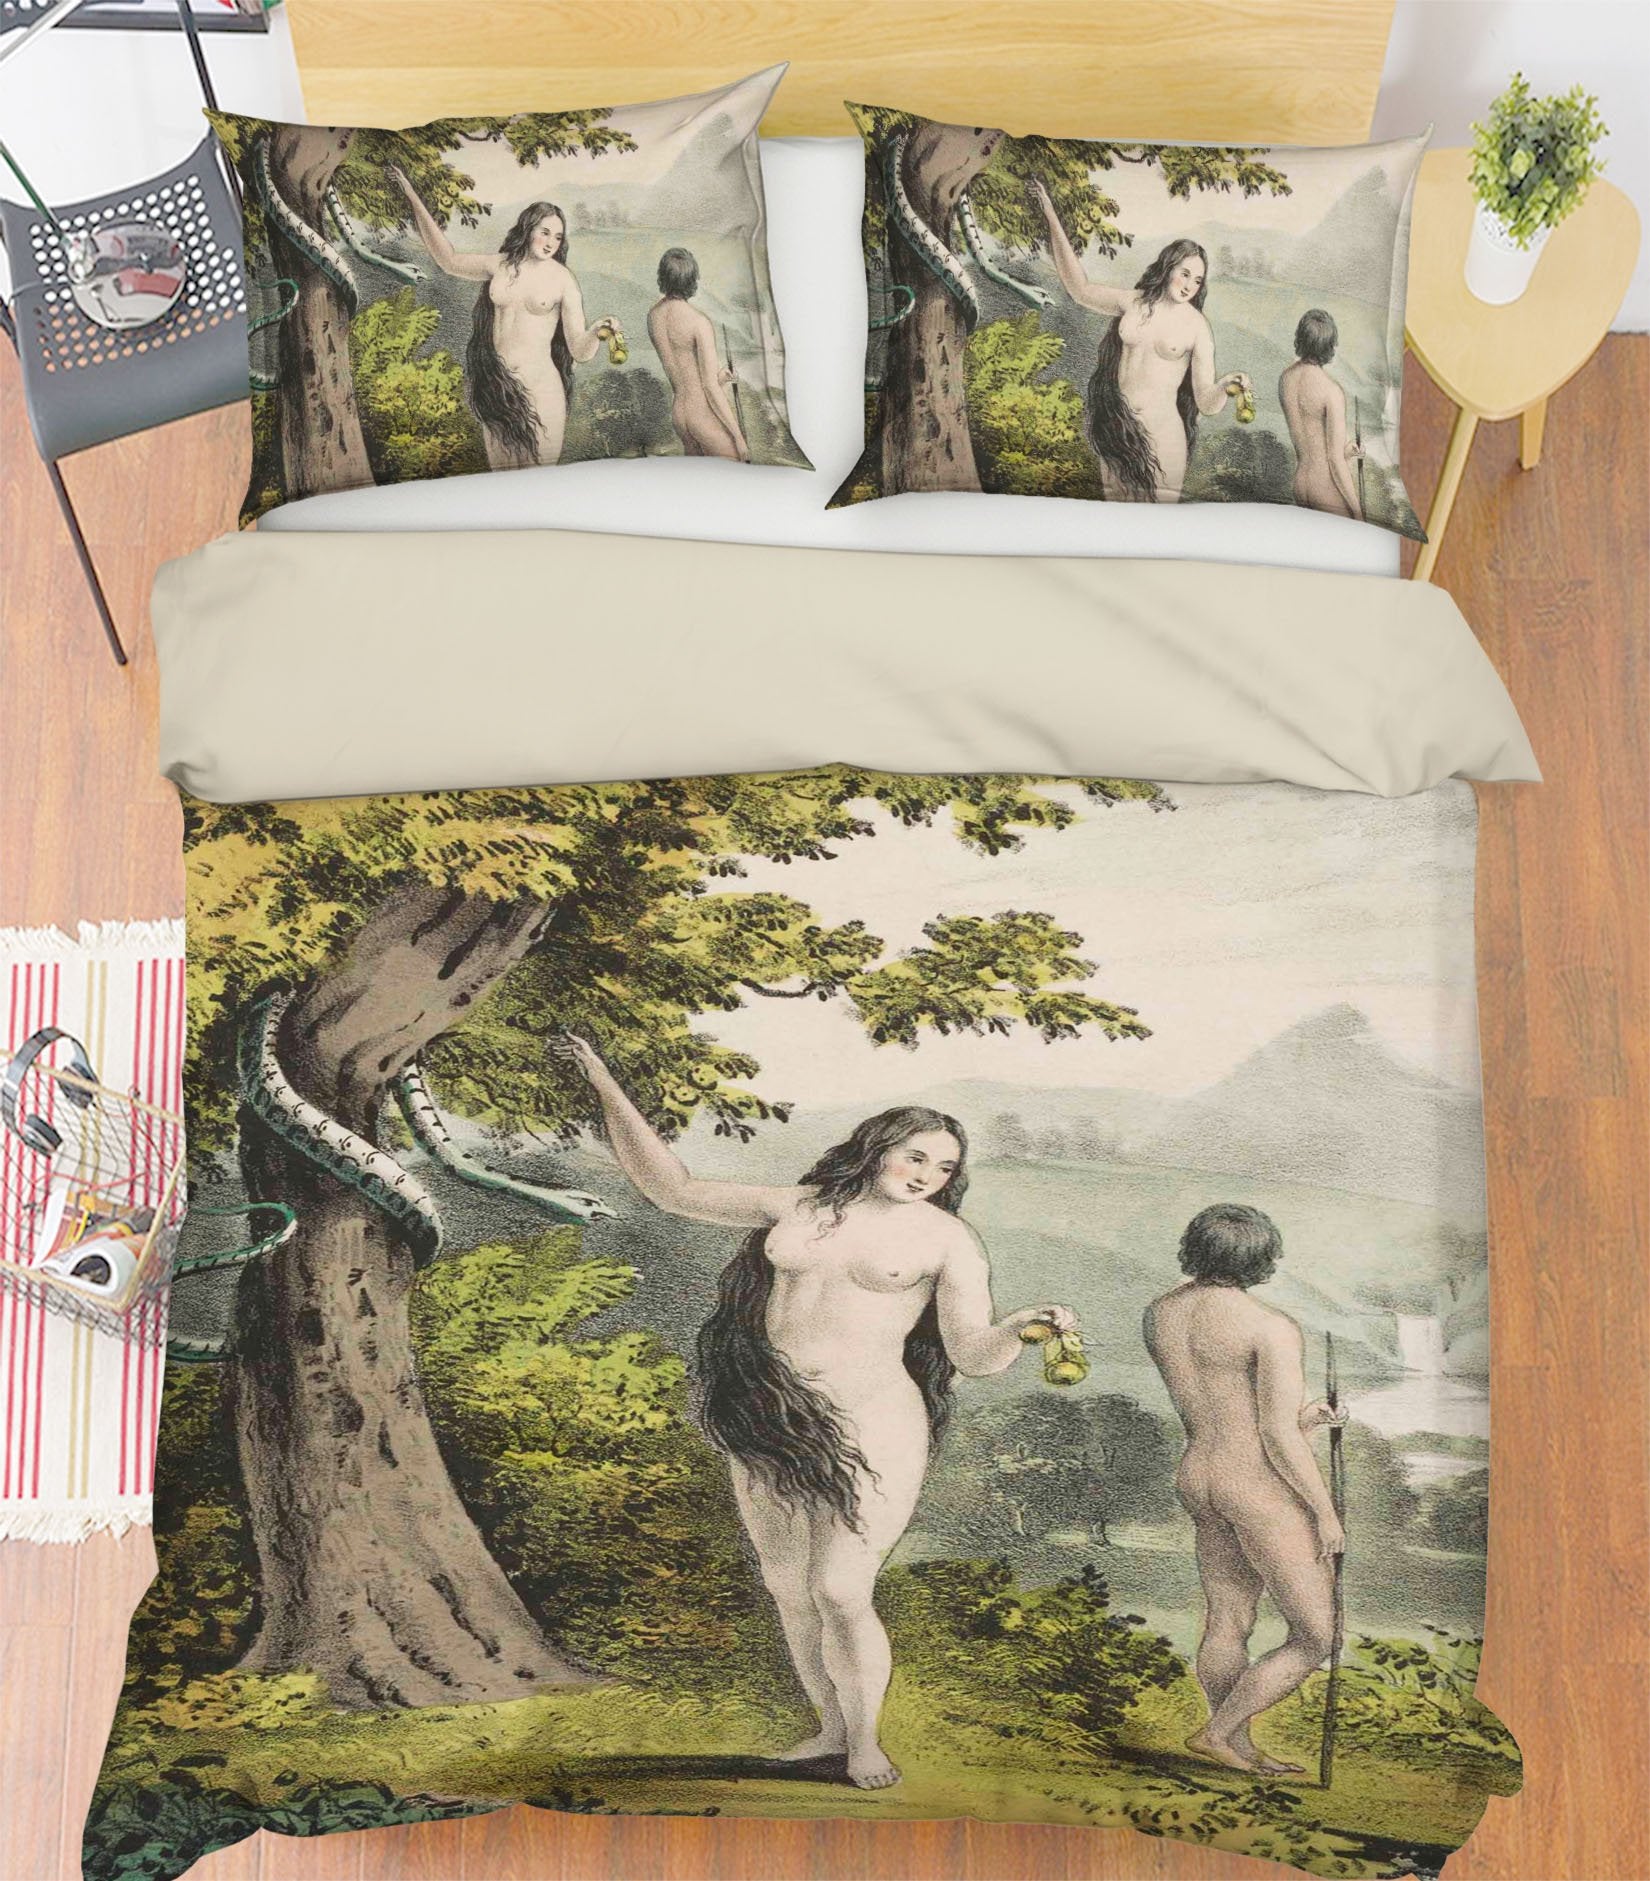 3D Adam Eve 2018 Andrea haase Bedding Bed Pillowcases Quilt Quiet Covers AJ Creativity Home 